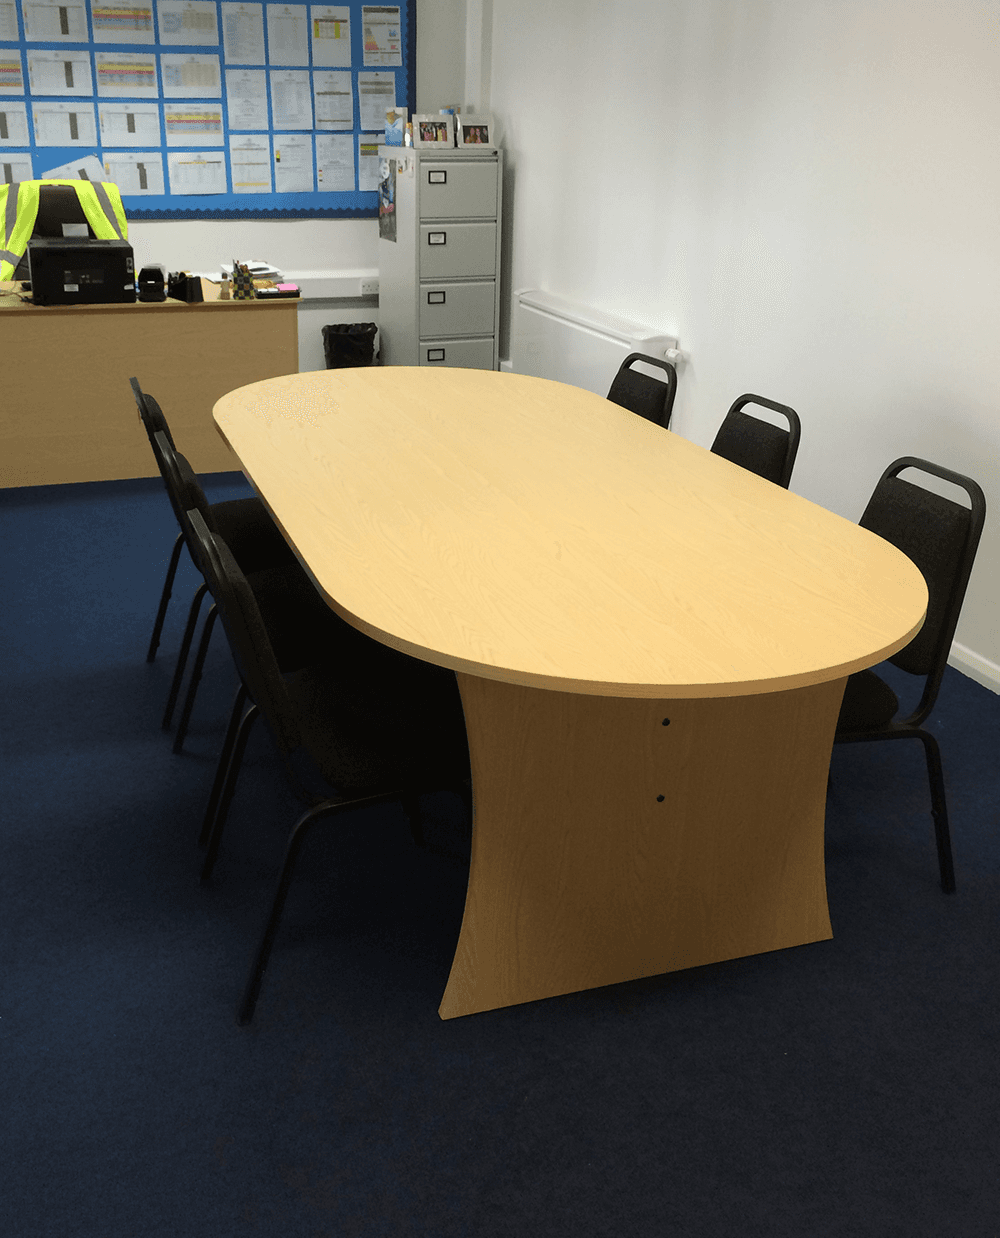 woden table with chairs